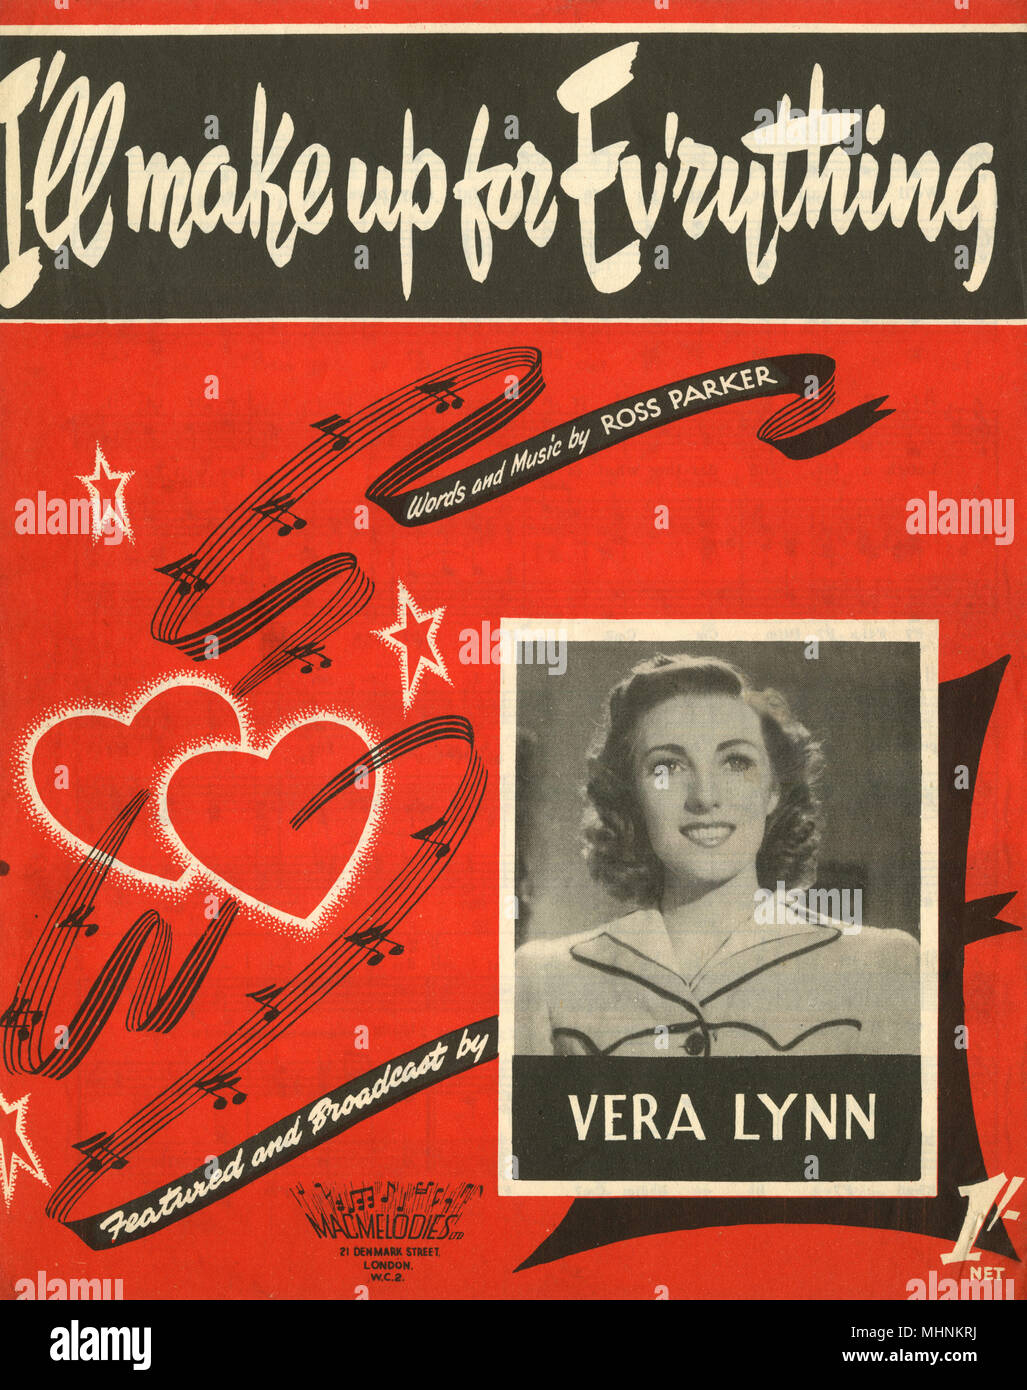 'I'll make up for Everything' - Music Sheet Cover, words and music by Ross Parker, featured and broadcast by Vera Lynn. An illustration of hearts, stars and a musical bar with a portrait of Vera Lynn on the right bottom.     Date: circa 1947 Stock Photo